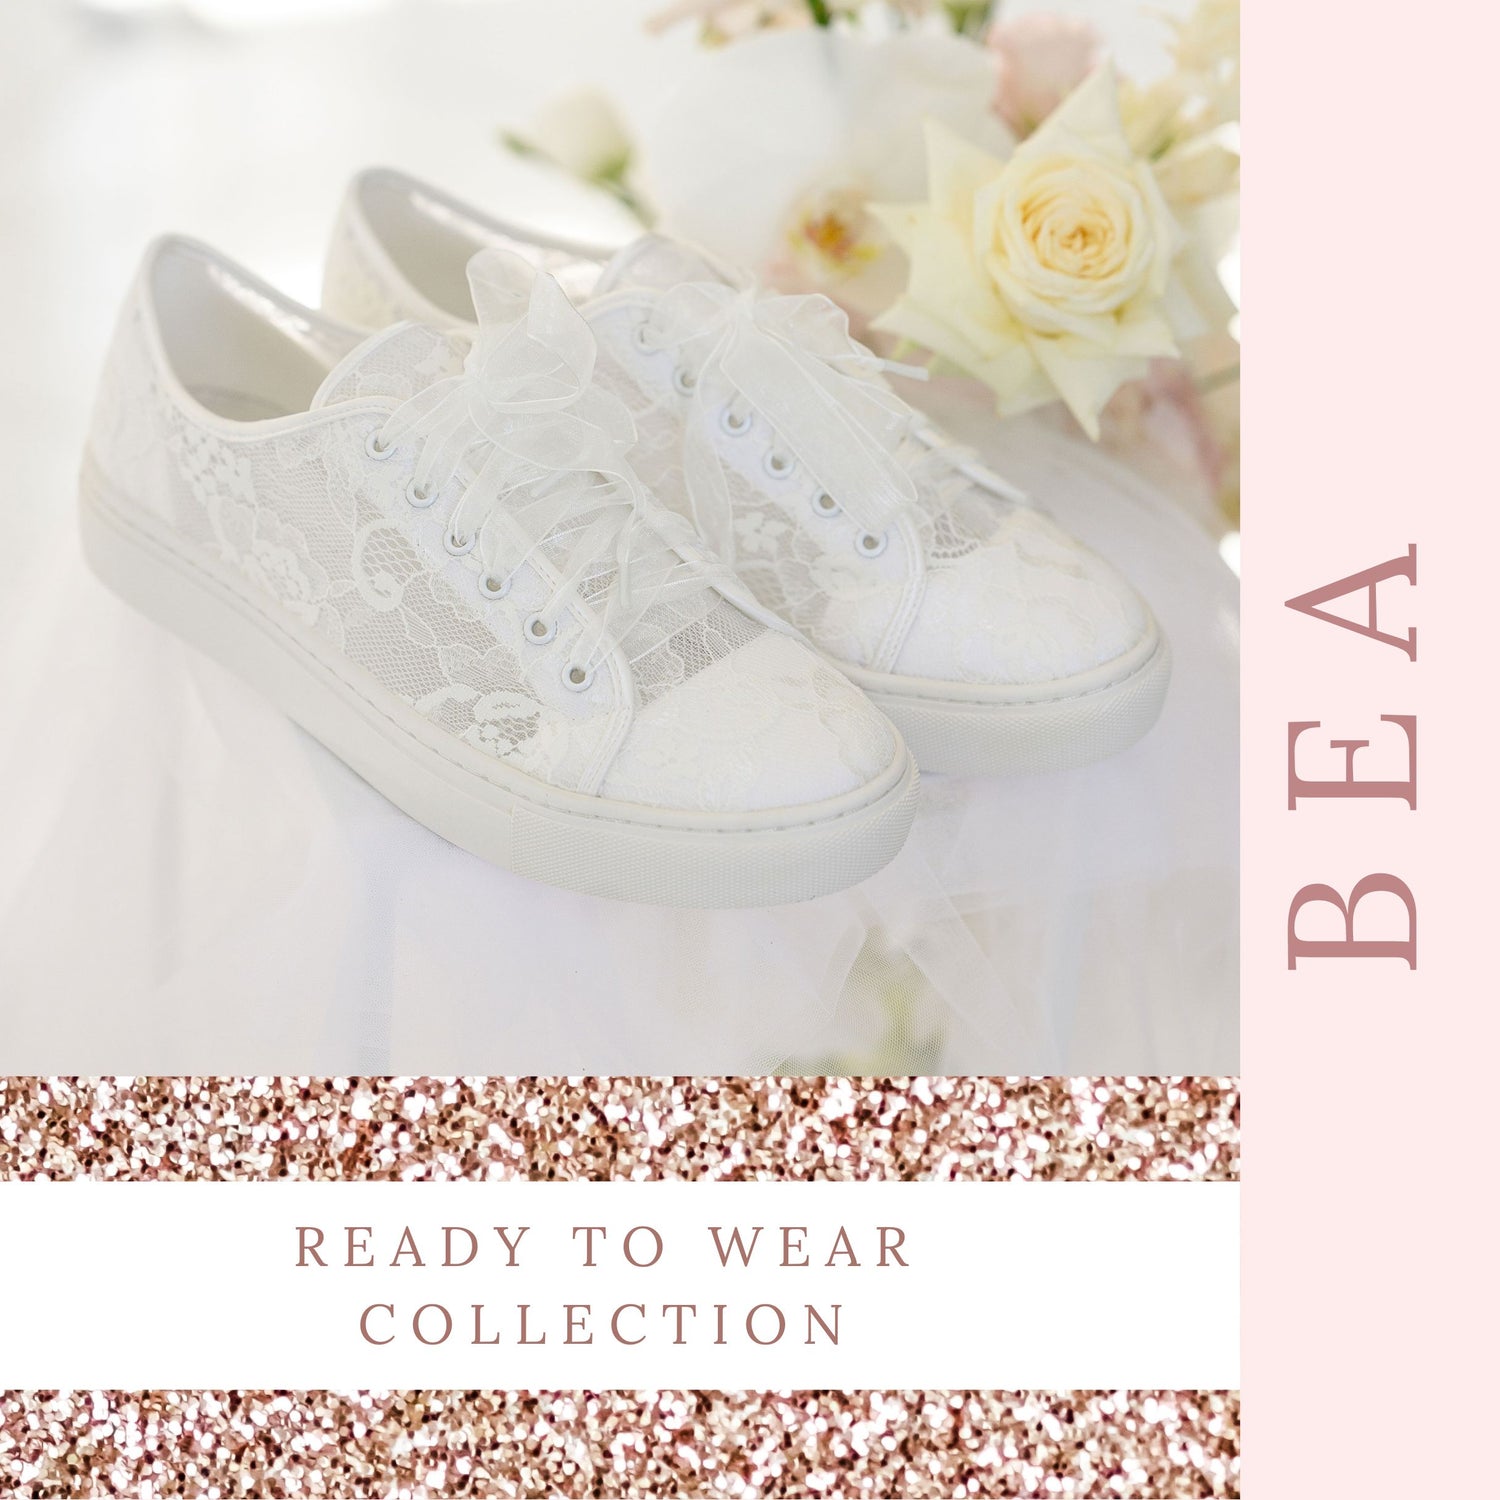 comfy-shoes-for-wedding-reception